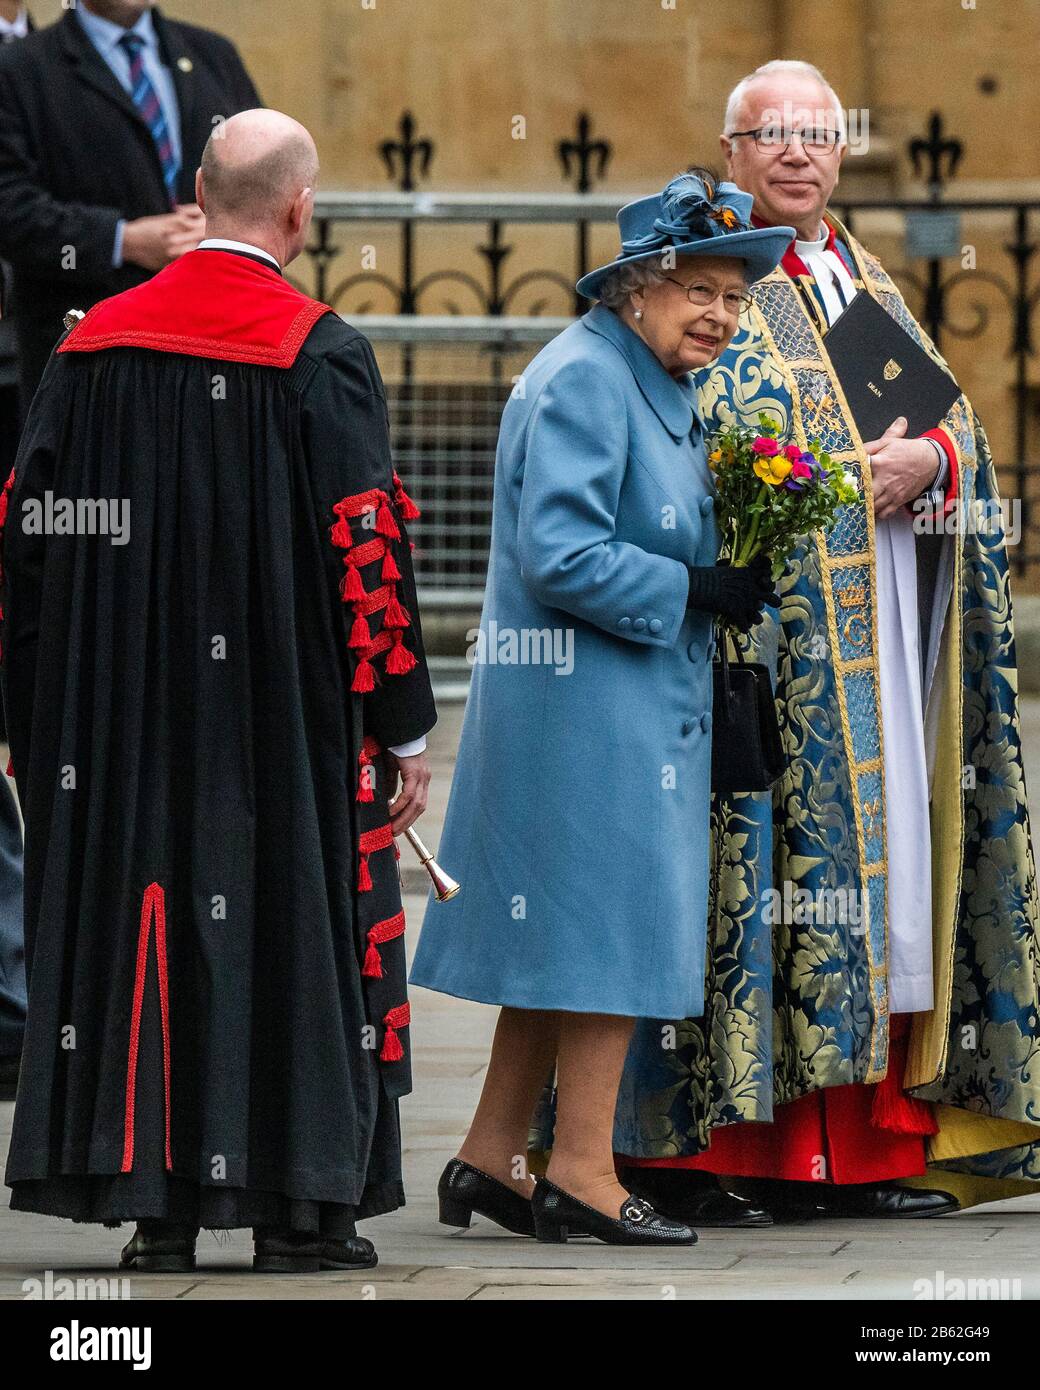 Westminster Abbey, London, UK. 09th Mar, 2020. The Queen Leaves - A service to commemorate the Commonwealth is attended by the Royal Family and representatives of Commonwealth countries, at Wrestminster Abbey, London. Credit: Guy Bell/Alamy Live News Credit: Guy Bell/Alamy Live News Stock Photo